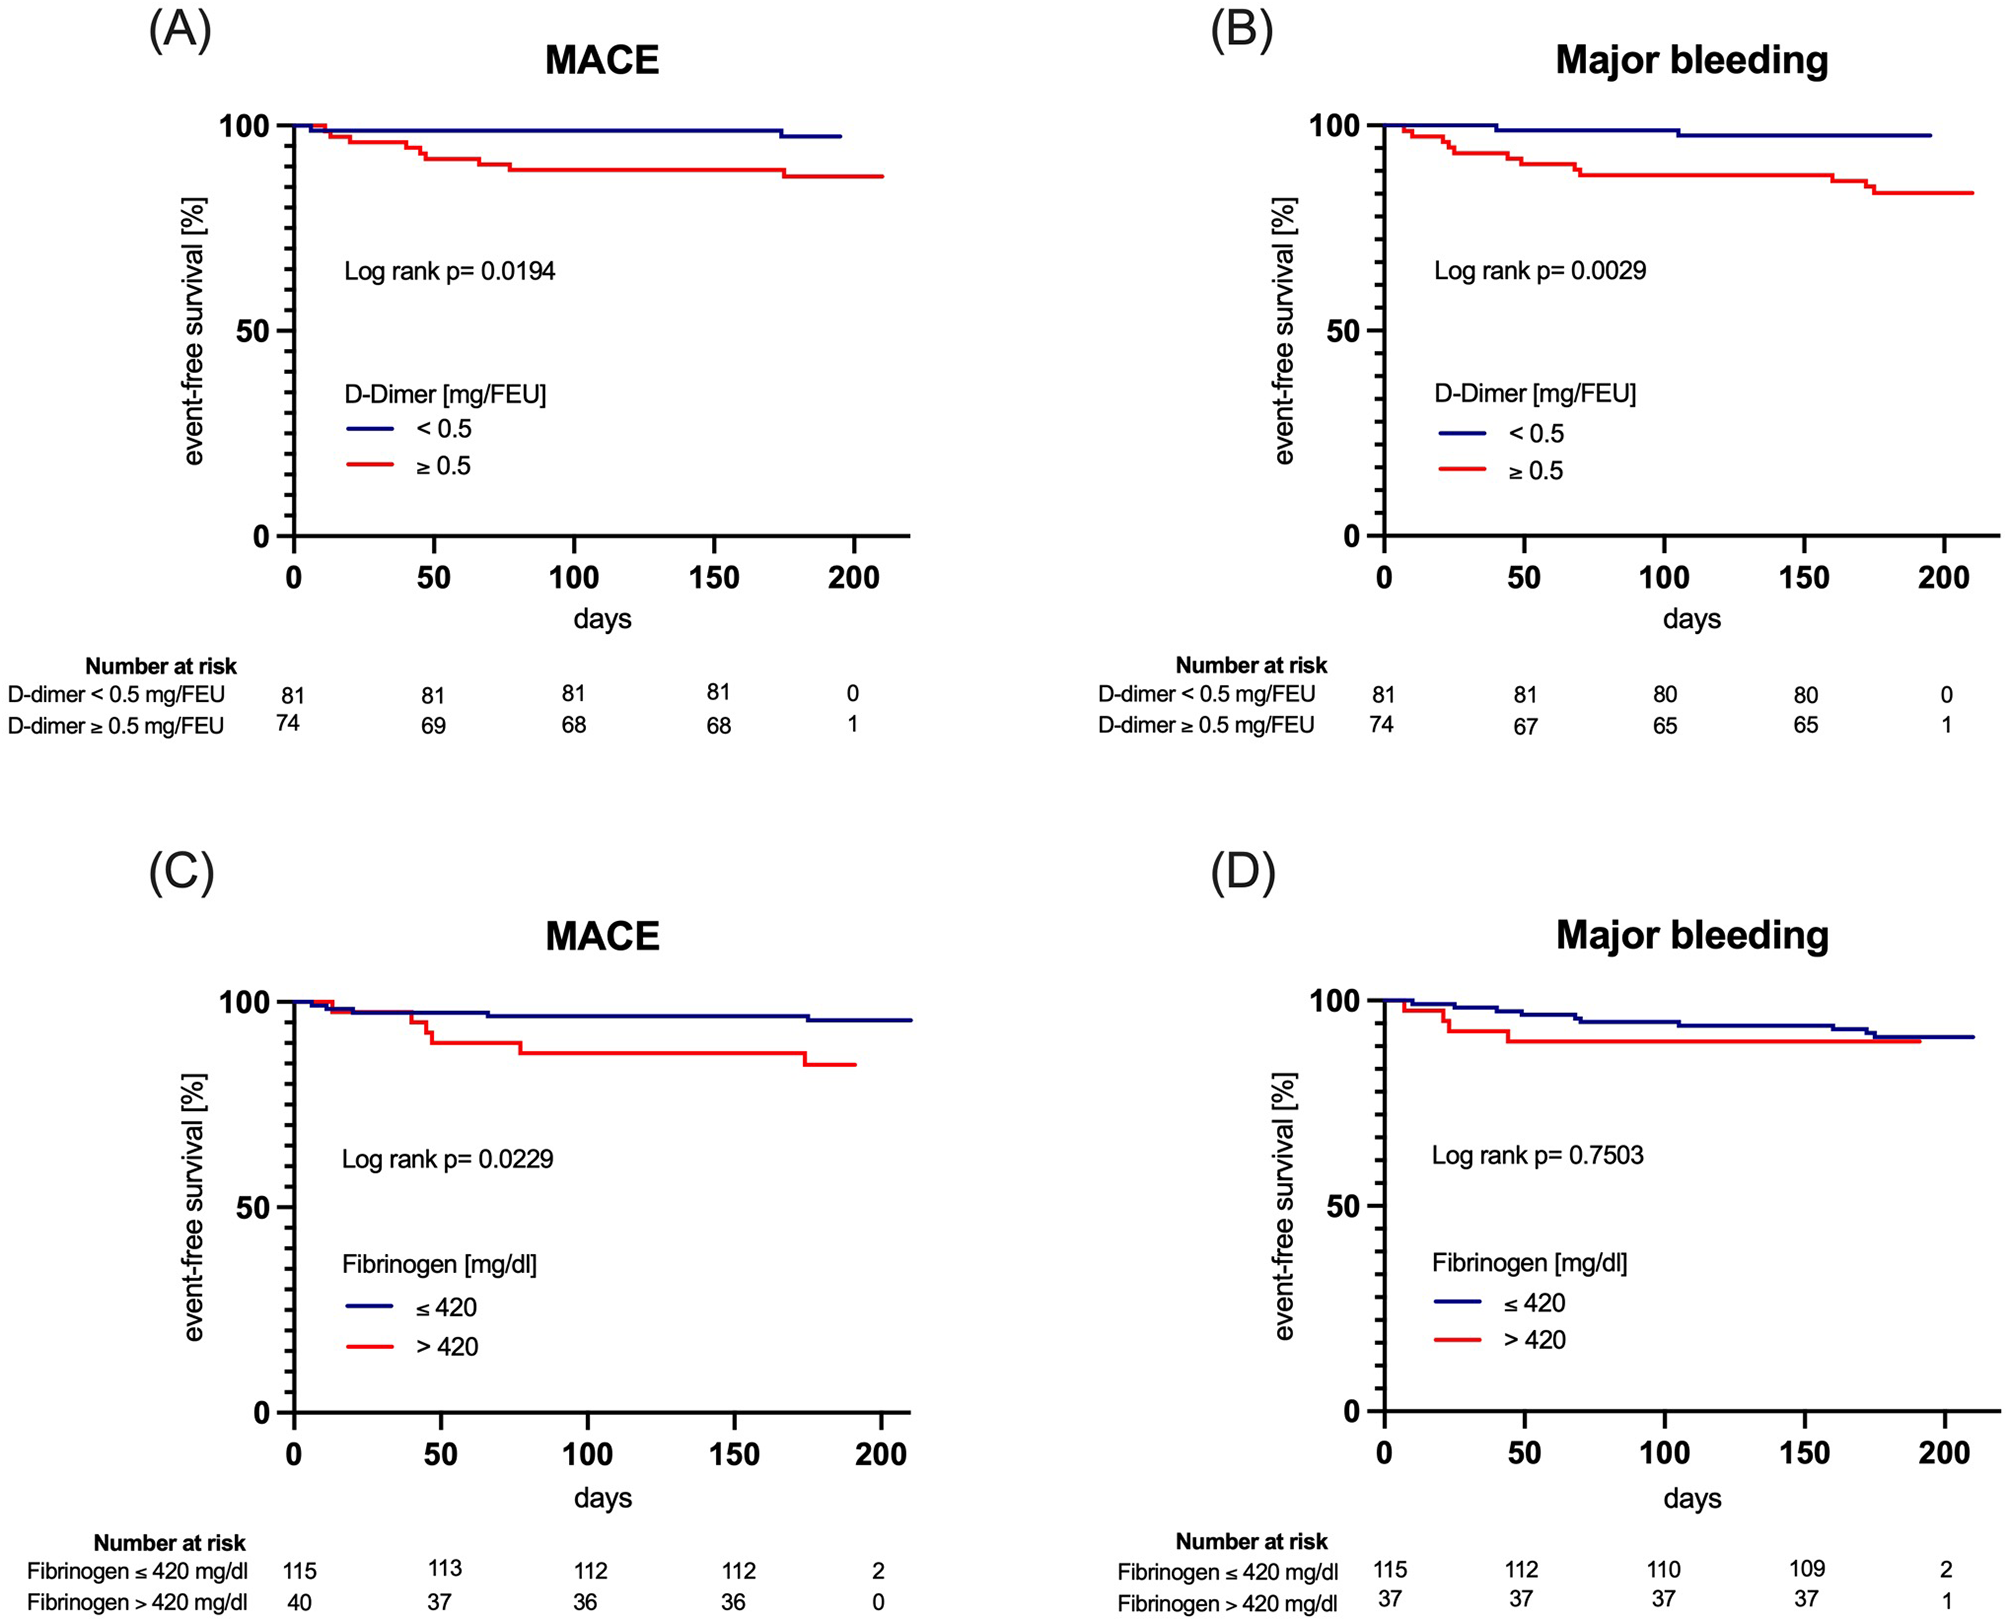 D-dimer and fibrinogen indicate ischemic risk in patients with atrial fibrillation after percutaneous coronary intervention